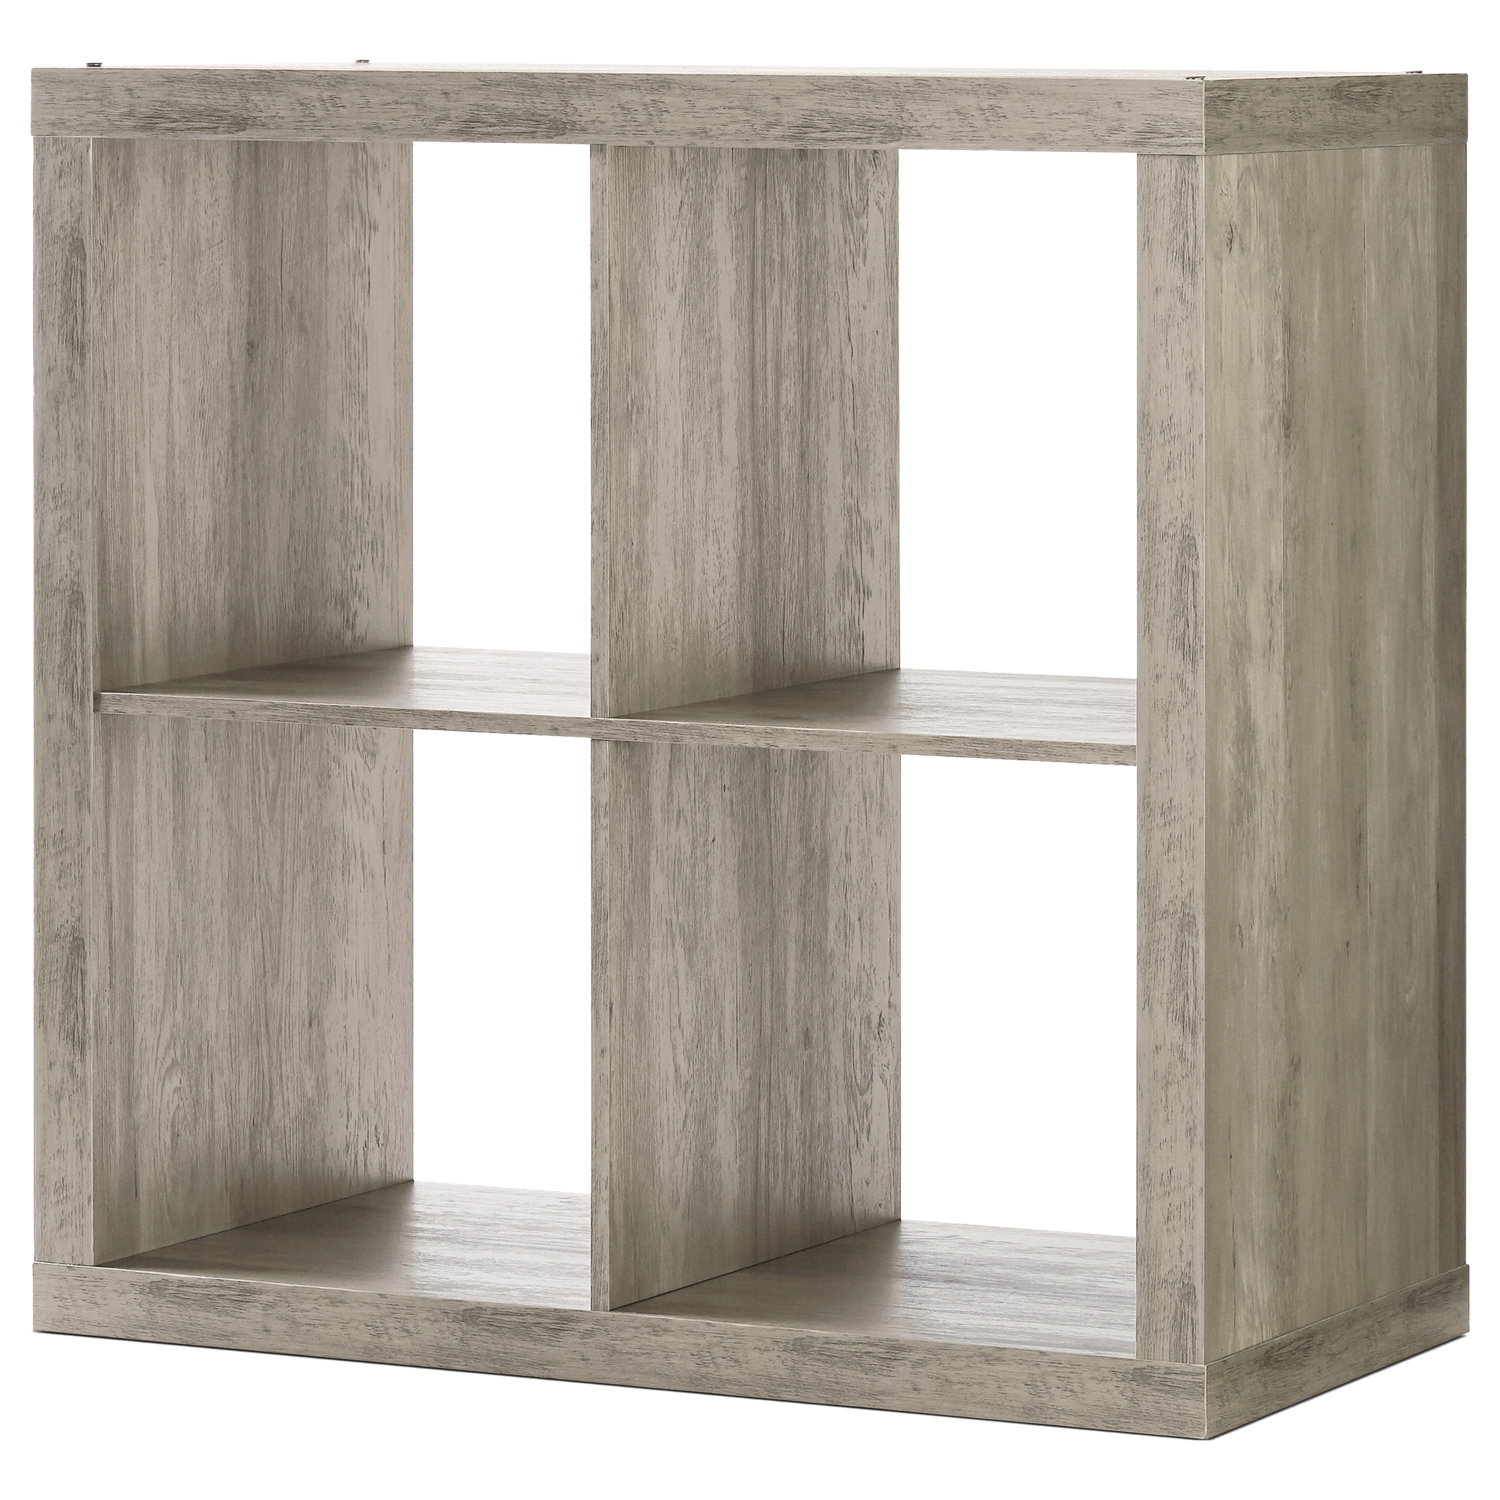 Better Homes & Gardens 4-Cube Storage Organizer, Rustic Gray - image 3 of 7